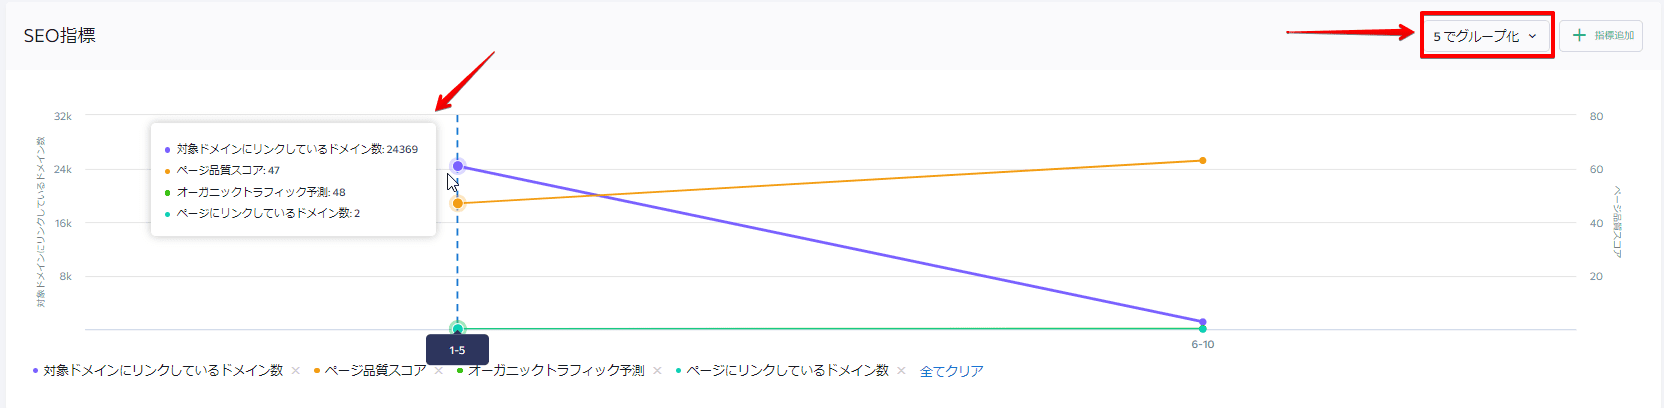 comparing results on the graph